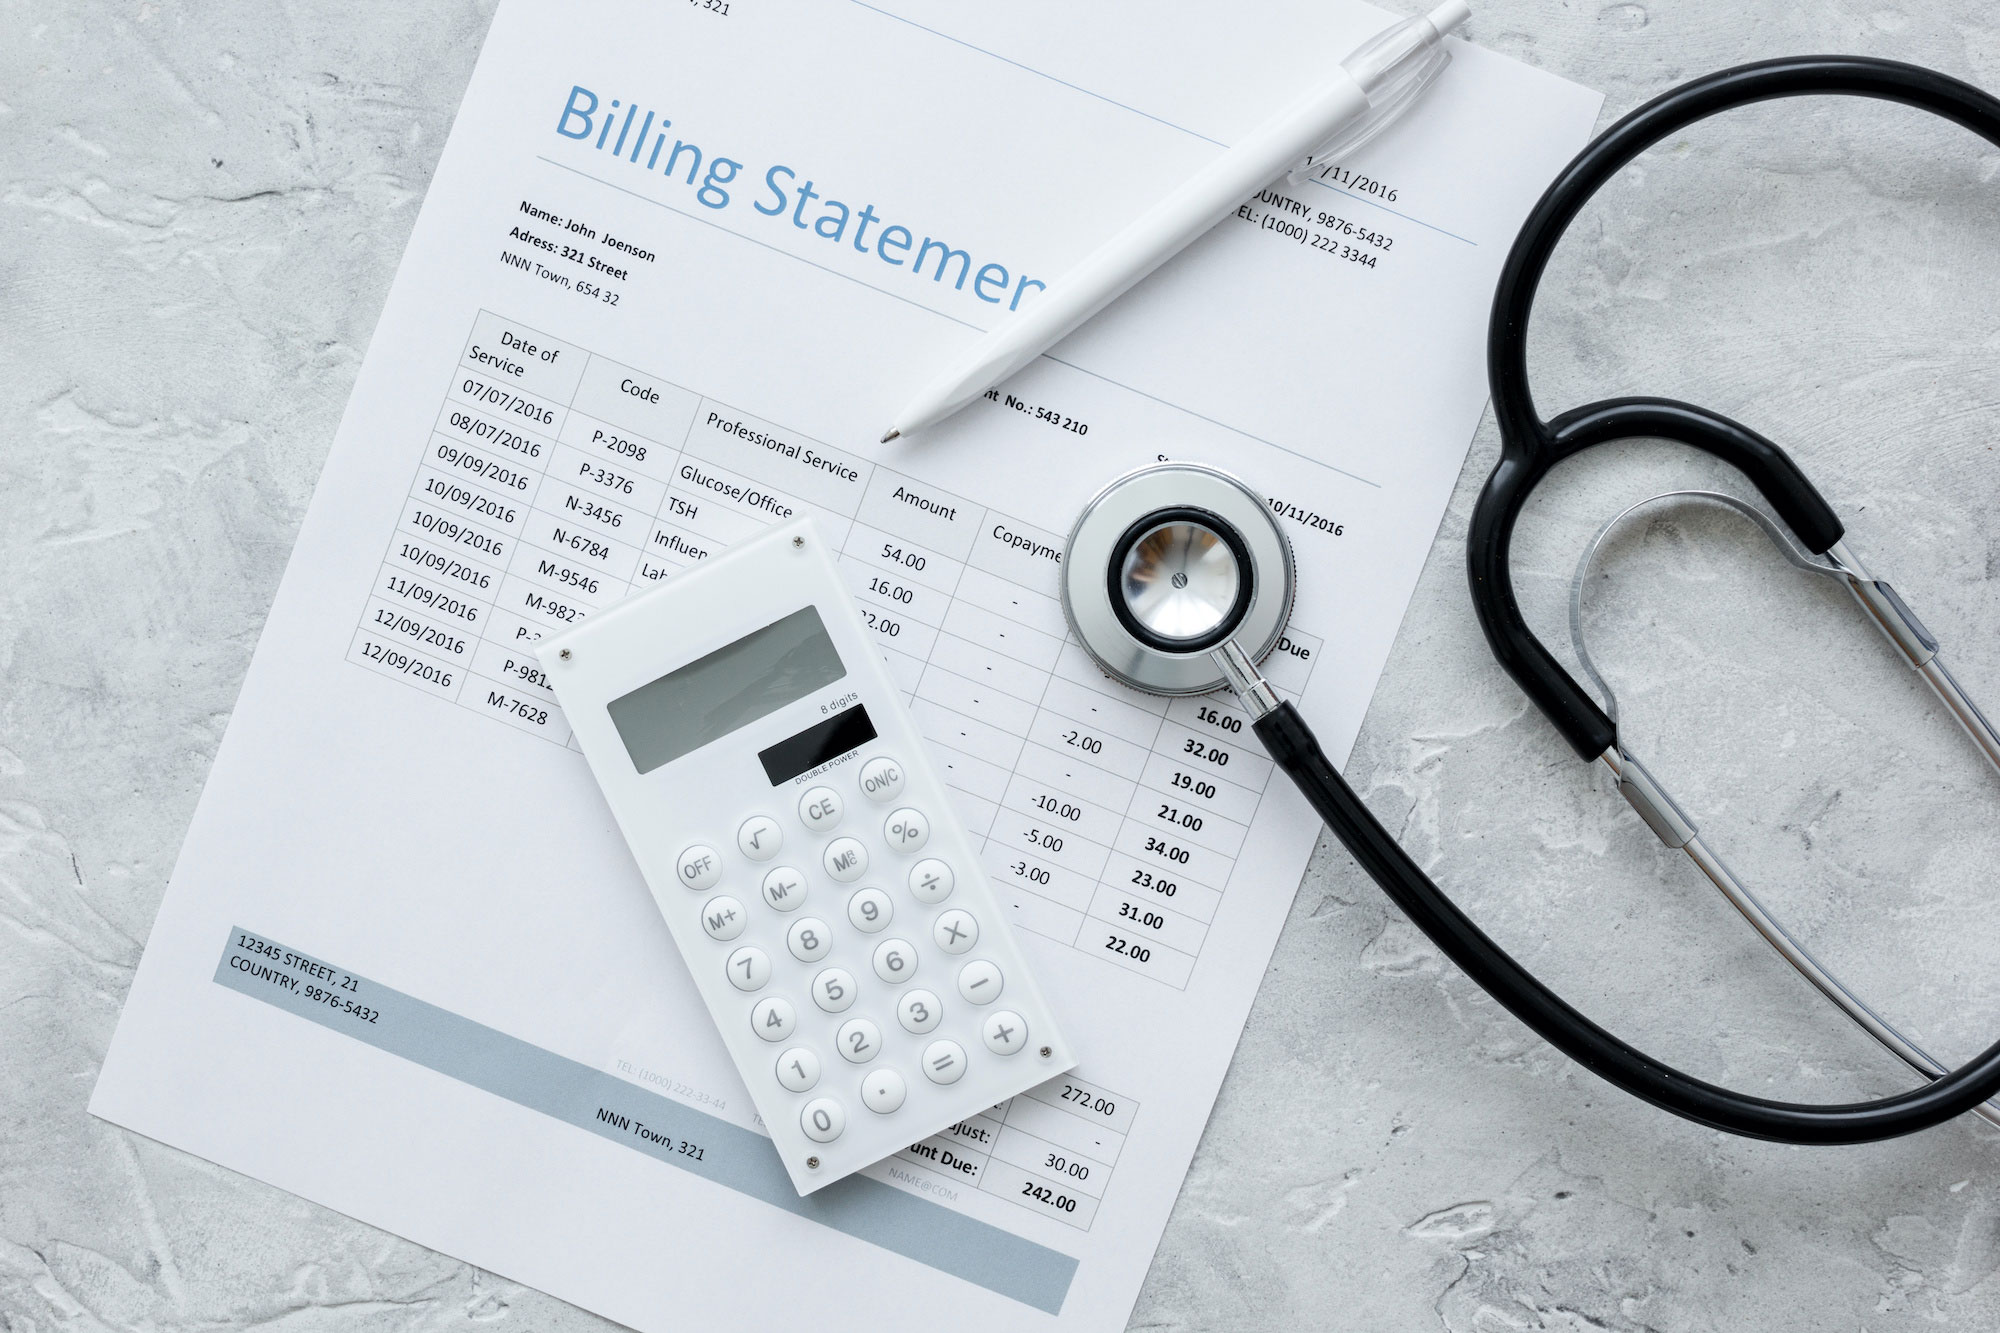 A stethoscope and a medical billing statement on a concrete background.